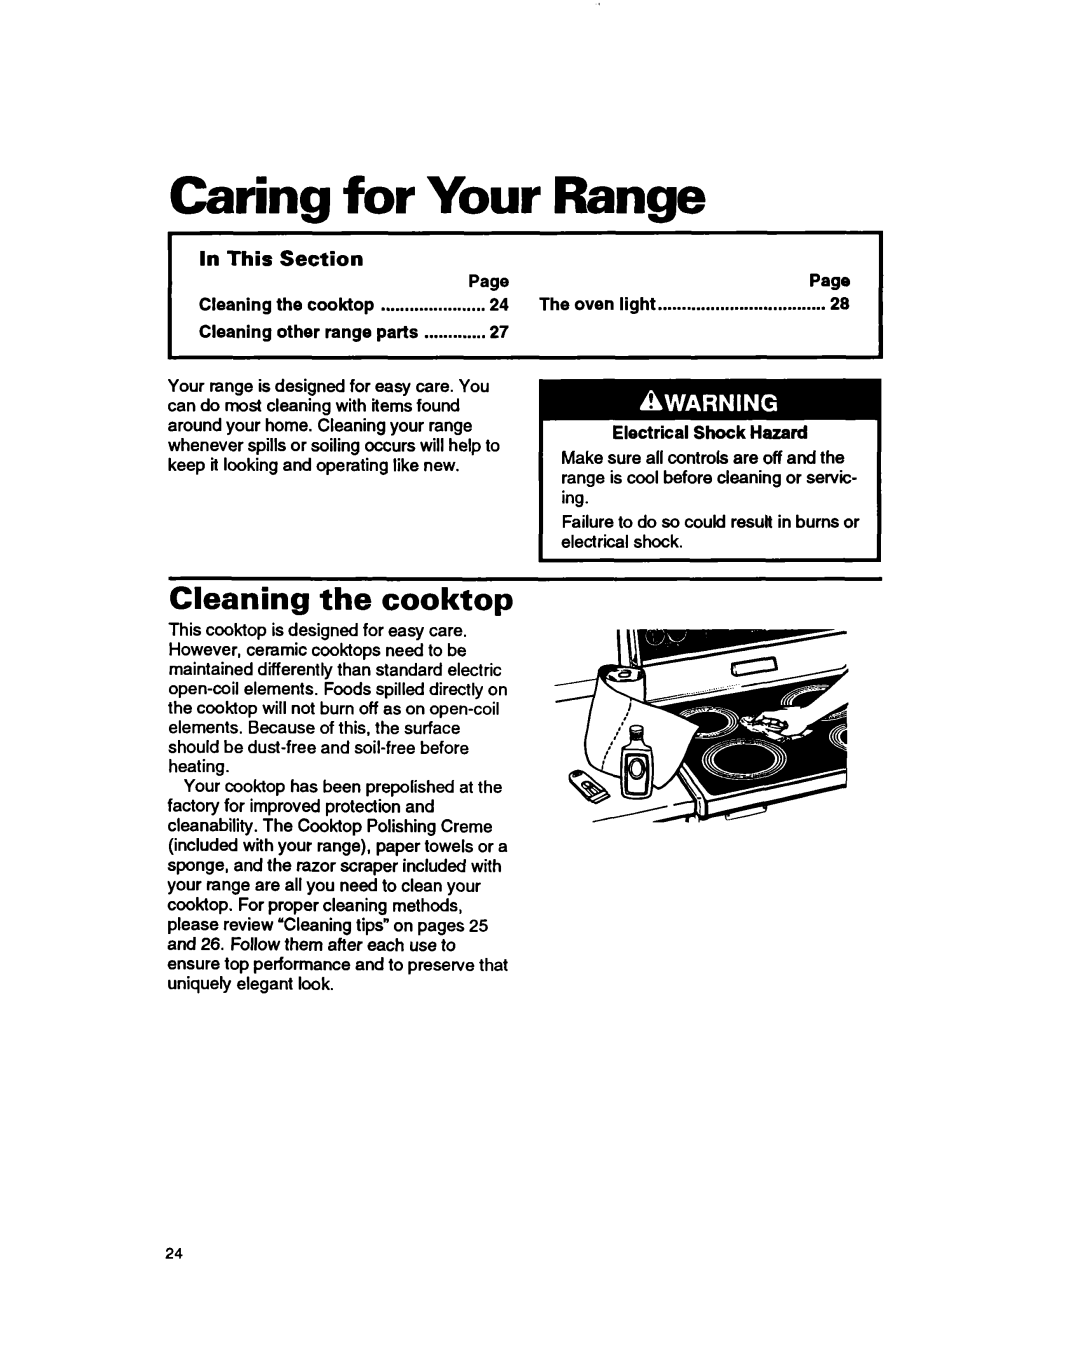 Whirlpool RF364PXY, RF364BXB Caring for, Cleaning the cooktop, Range, Your, In This Section, Page, Electrical Shock Hazard 